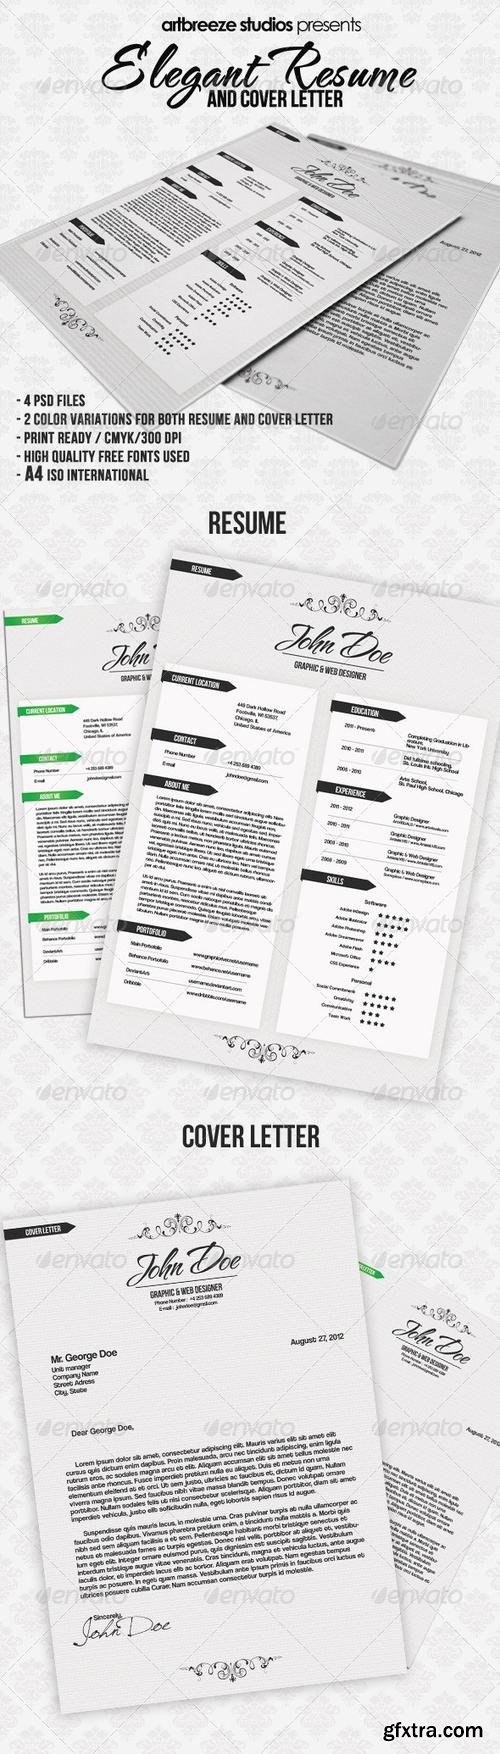 GraphicRiver - Elegant Resume and Cover Letter - 2865911